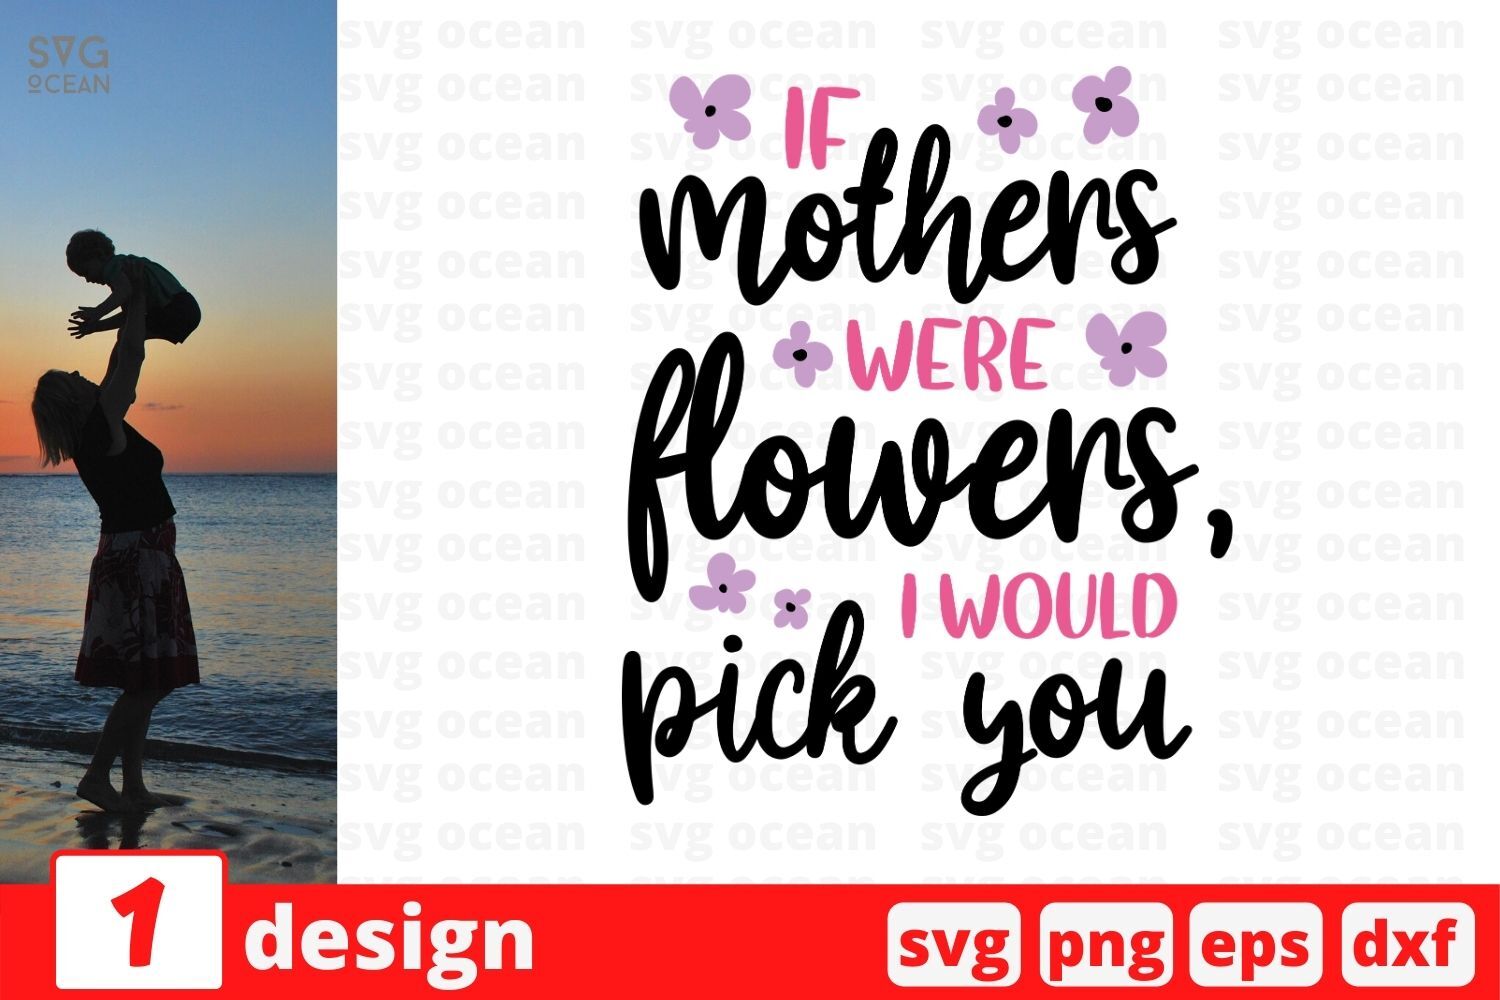 if-mothers-were-flowers-i-would-pick-you-svg-cut-file-by-svgocean-thehungryjpeg